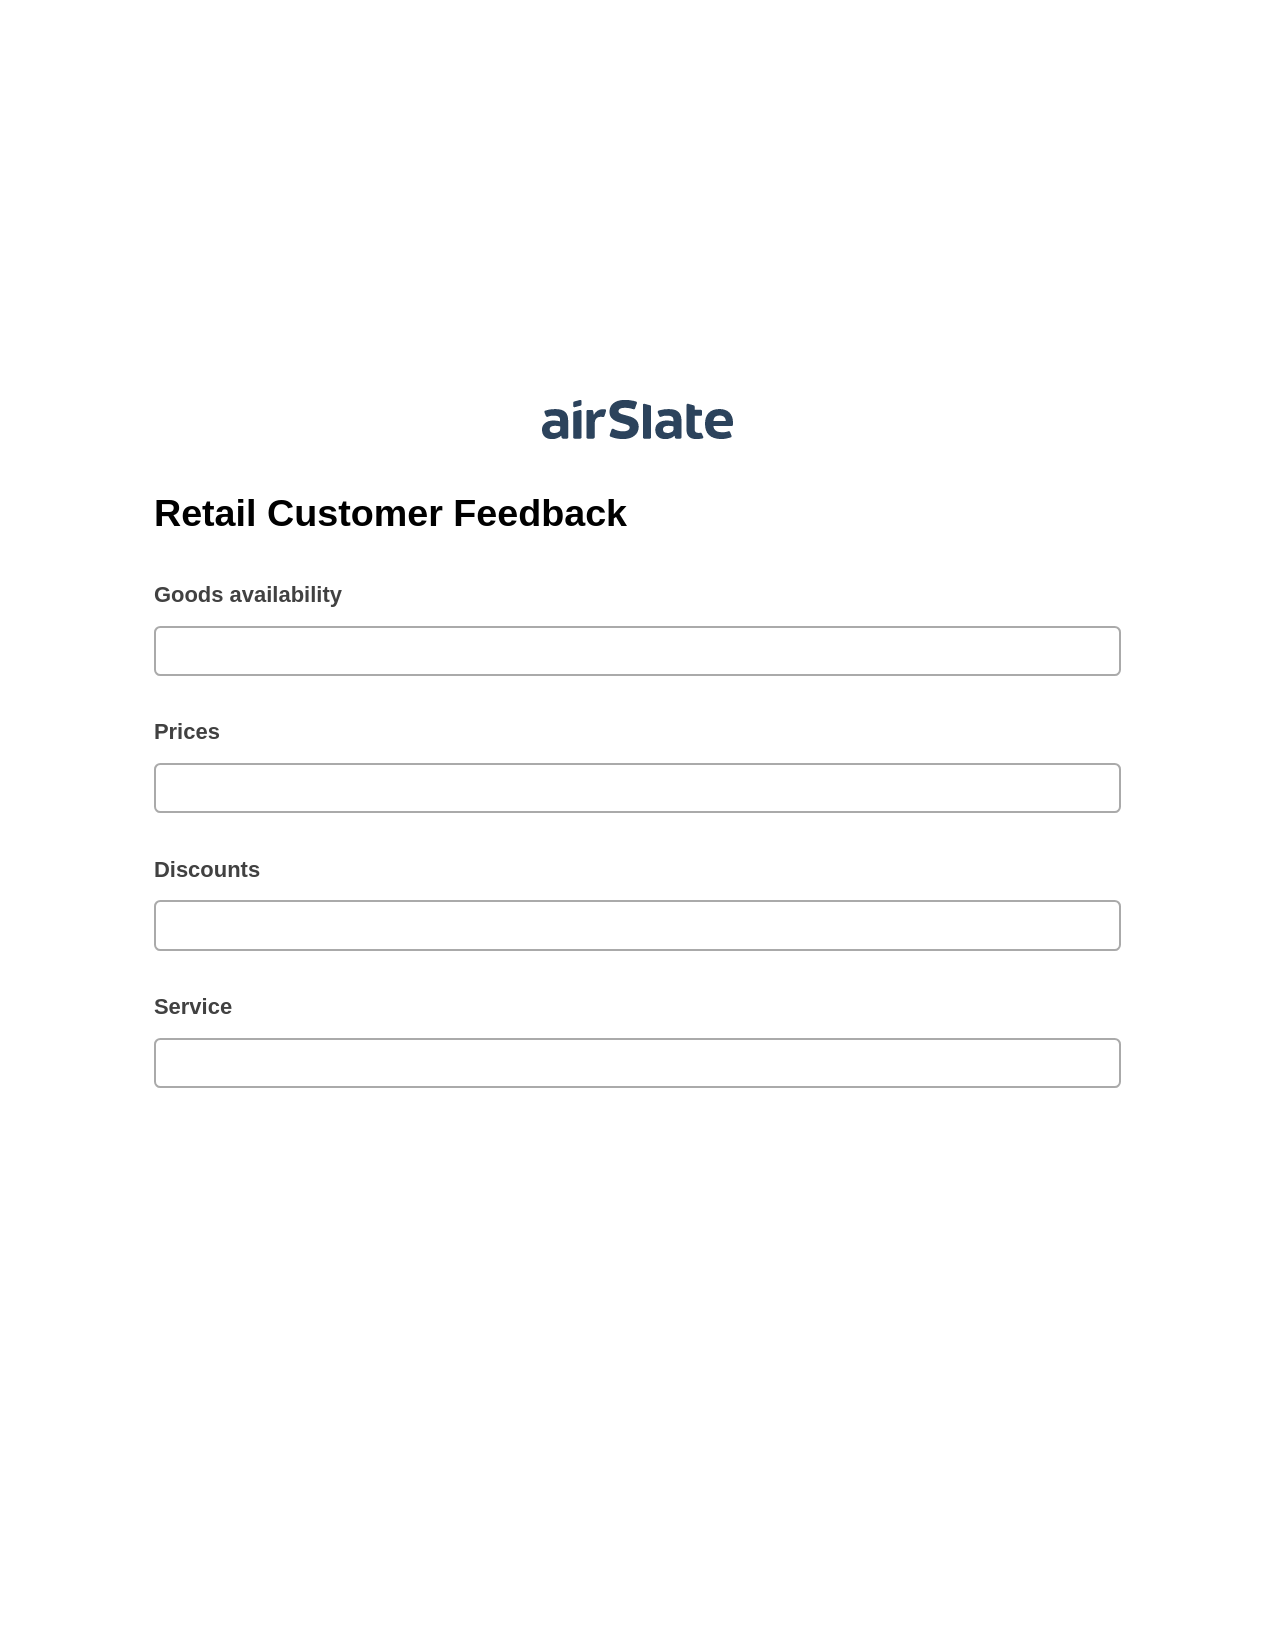 Retail Customer Feedback Pre-fill from another Slate Bot, Add Tags to Slate Bot, Export to Excel 365 Bot